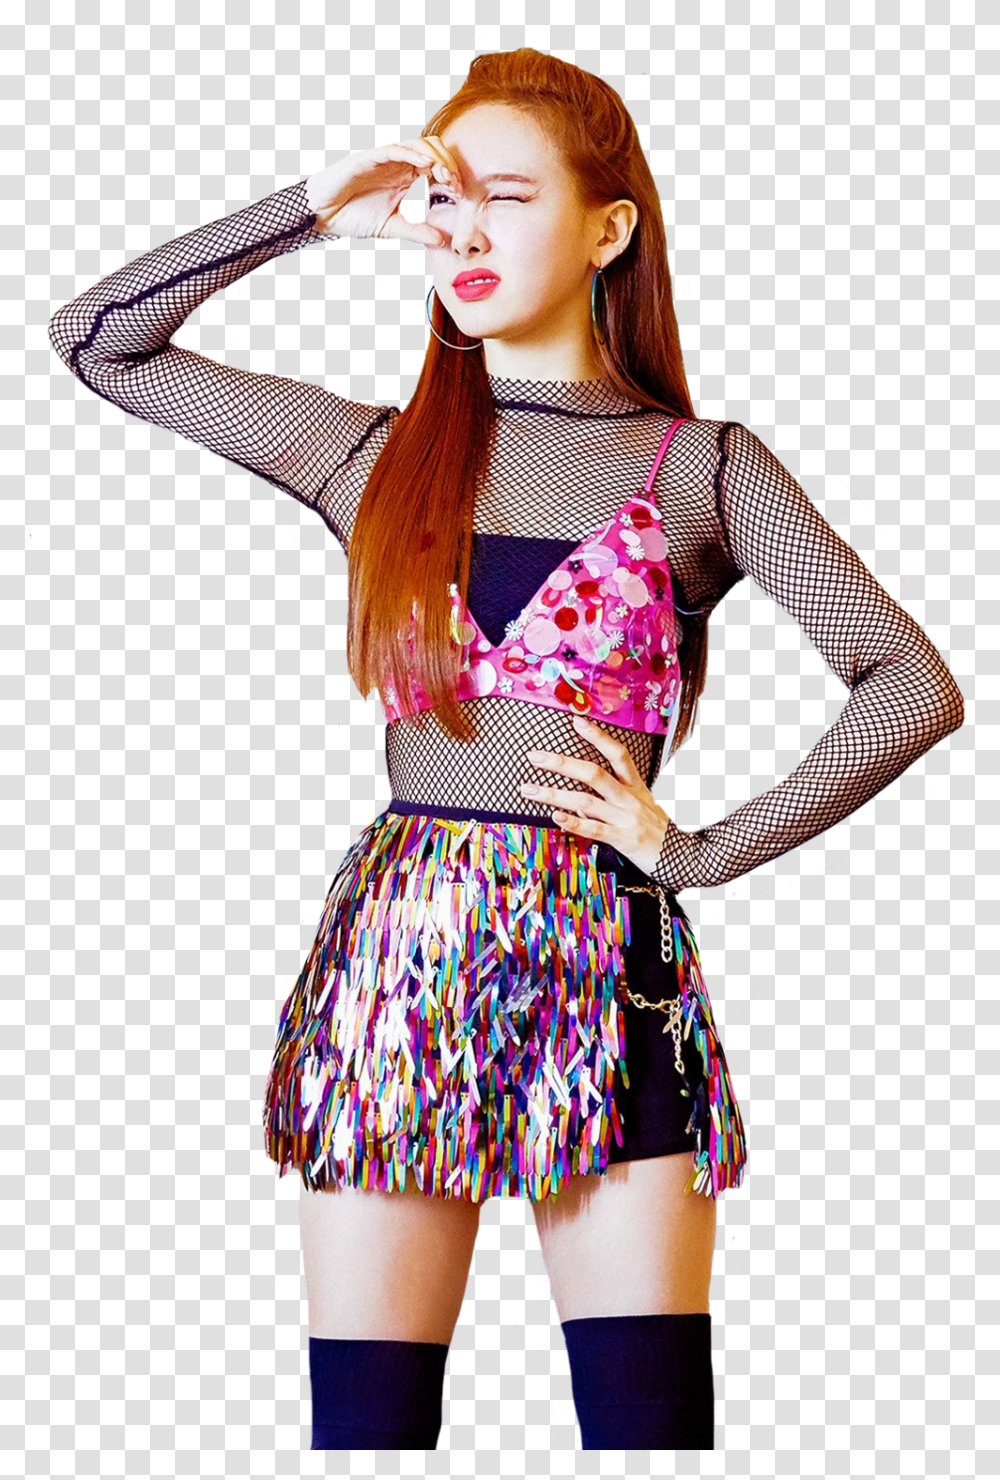 Twice Nayeon Fancy You Twice Nayeon Fancy, Skirt, Costume, Person Transparent Png